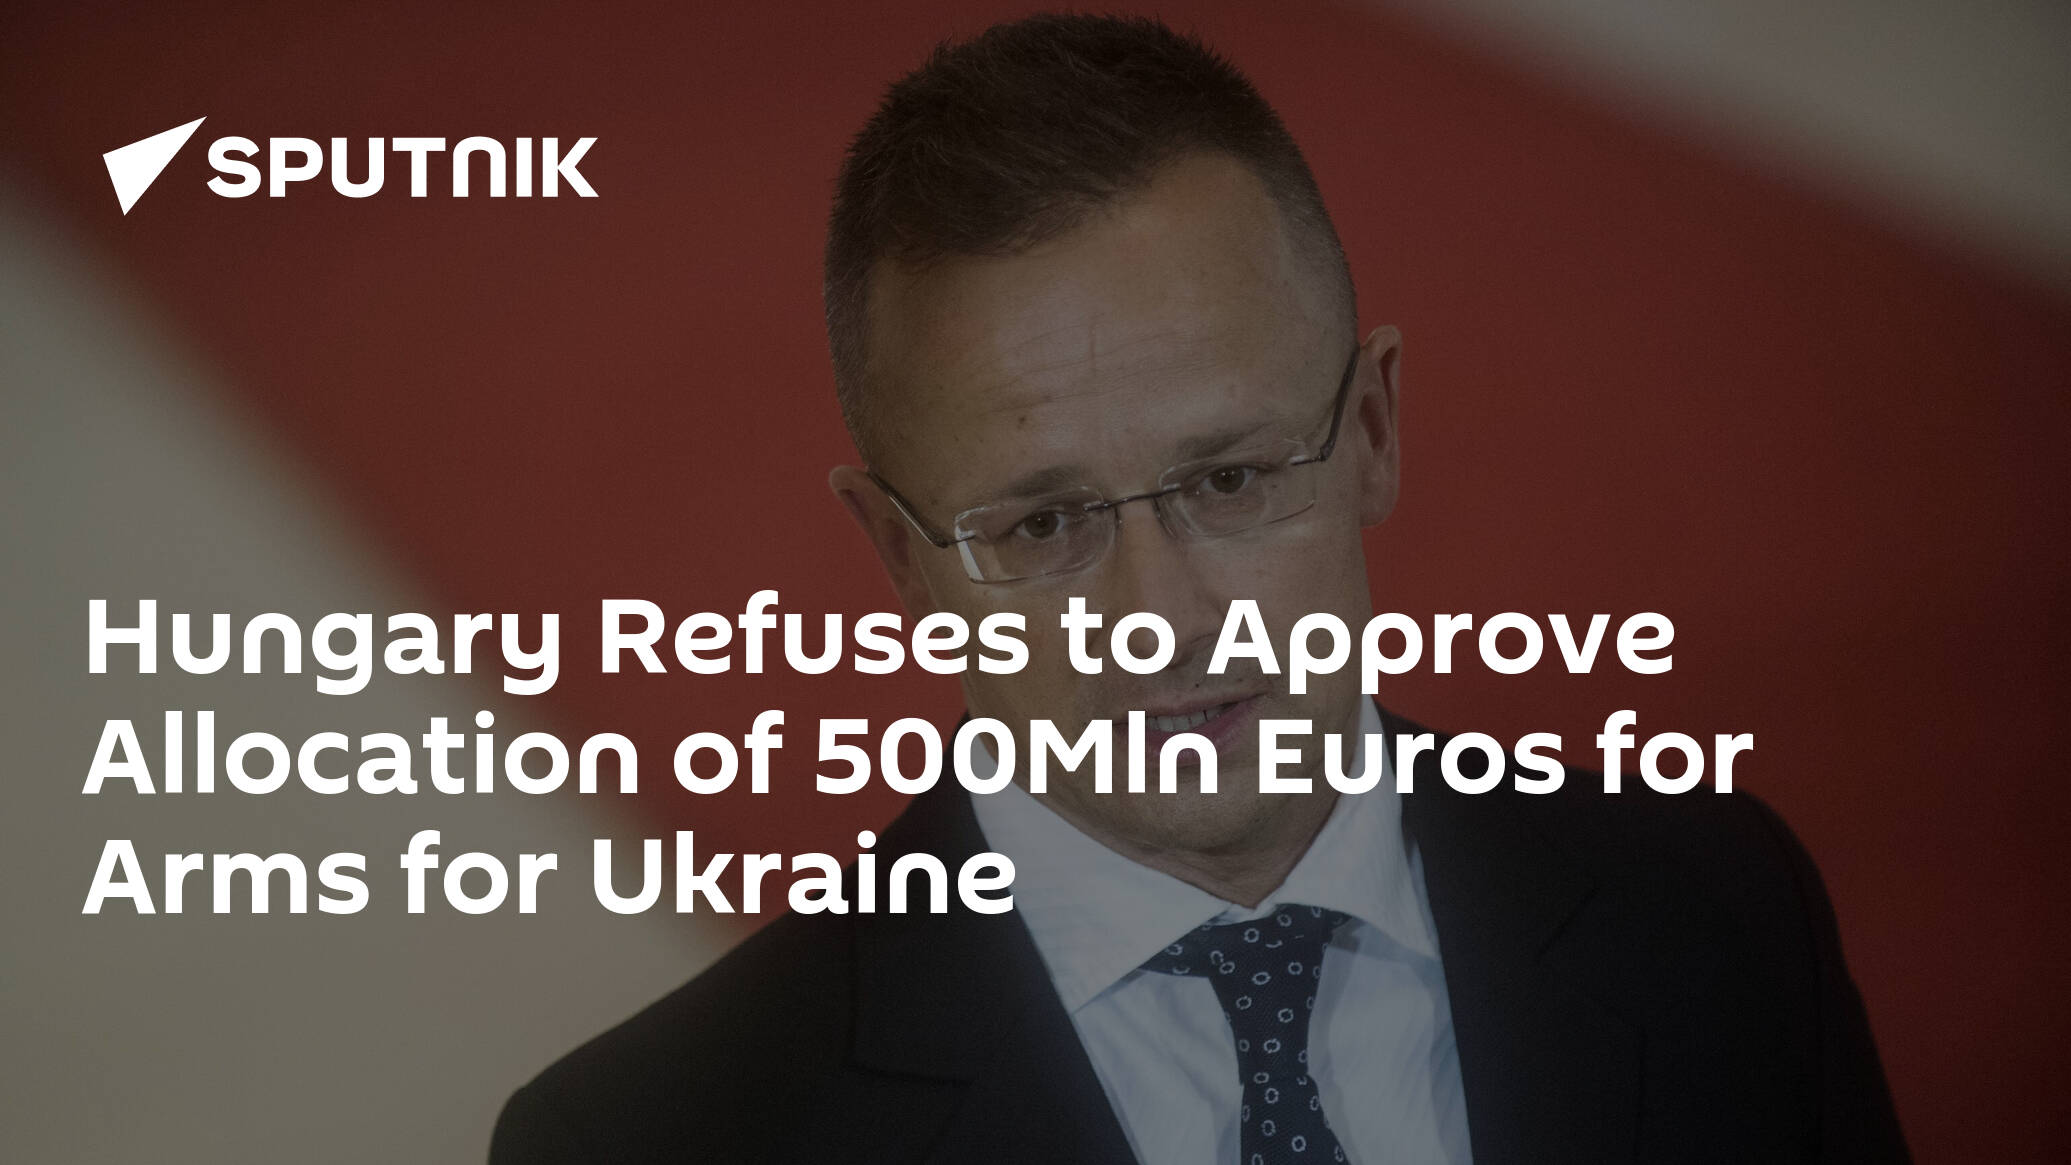 Hungary Refuses to Approve Allocation of 500Mln Euros for Arms for Ukraine